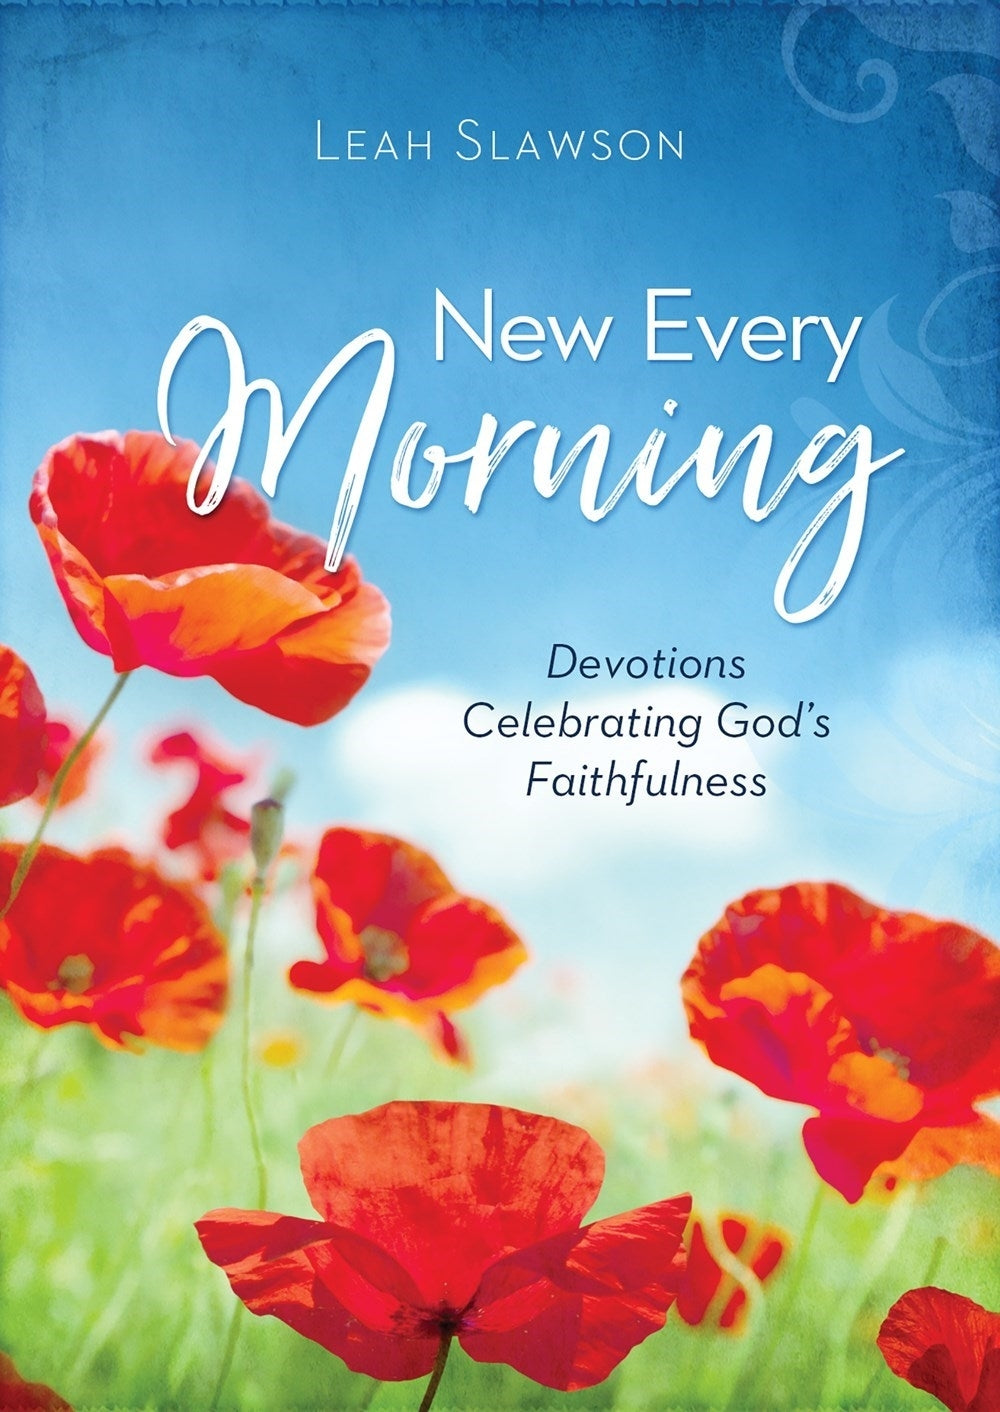 New Every Morning - The Christian Gift Company